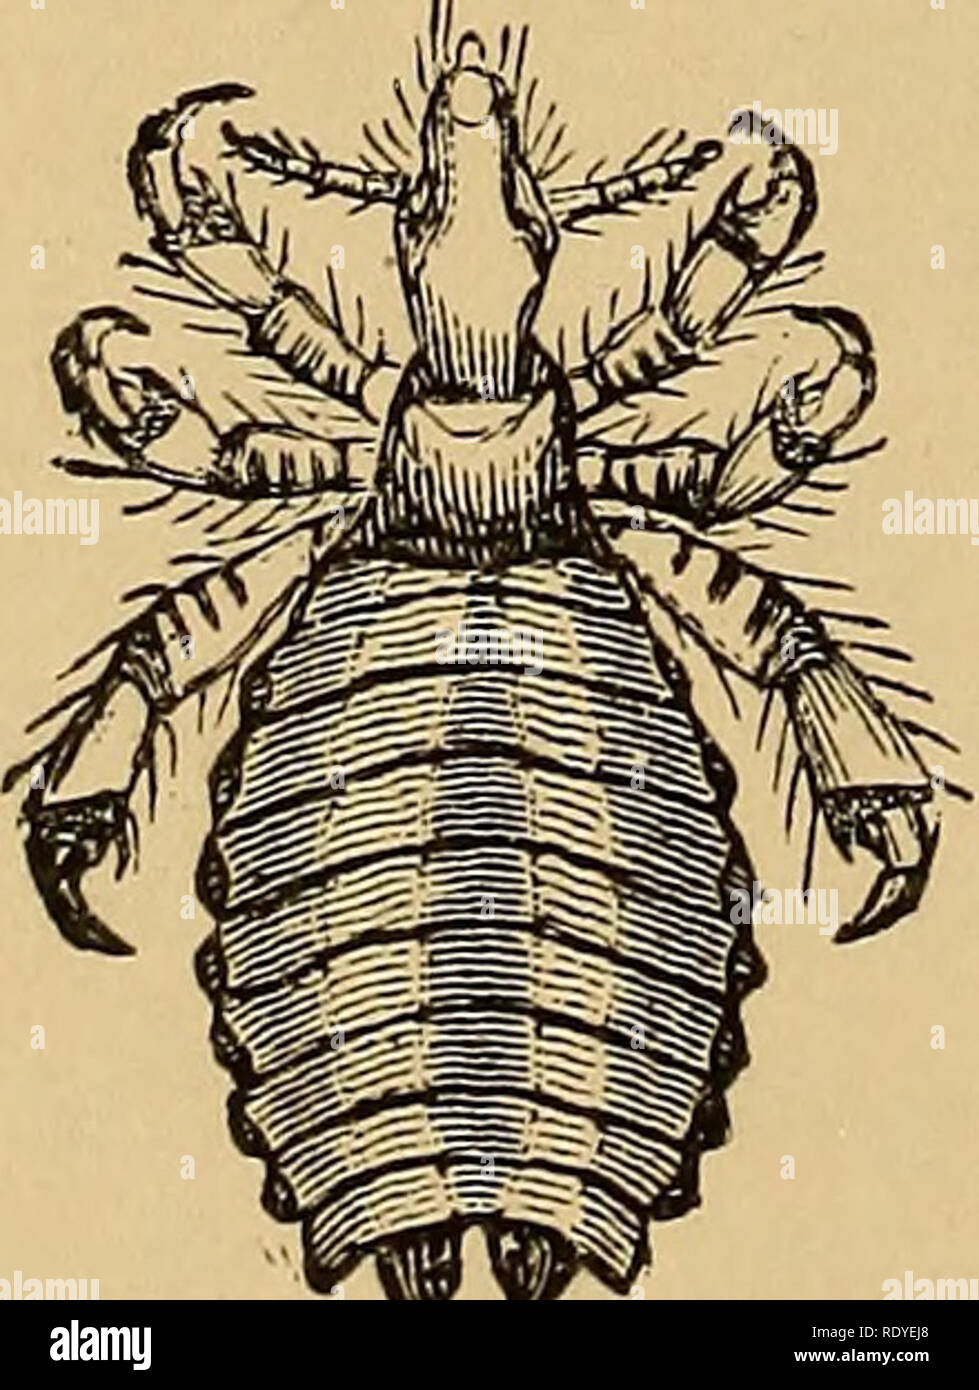 . Economic entomology. Beneficial insects; Insect pests; Thysanura. 386 ANOPLURA. CASE J^^MATOPiNUS ACANTHOPUS {Burm.).—25. Specimens {2); 26. Enlarged XIX. fi-rure of ditto ; 2&quot; Nos. 25-27- Infests field mice. XIX. figure of ditto ; 27. Illustrative vignette (field mouse). Nos. jg-Qg H.EMATOPINUS SPINULOSUS {Buriii.).—23. Specimens (eggs and insects); 23—30. 29. Enlarged figure of ditto ; 30. Illustrative vignette (brown rat). Infests the brown rat. I^os  H^MATOPINUS VENTRicosus {Denny).—31. Specimens (2) ; 32. Enlarged 31—33- figure of ditto ; 33. Illustrative vignette (rabbit). Infests Stock Photo